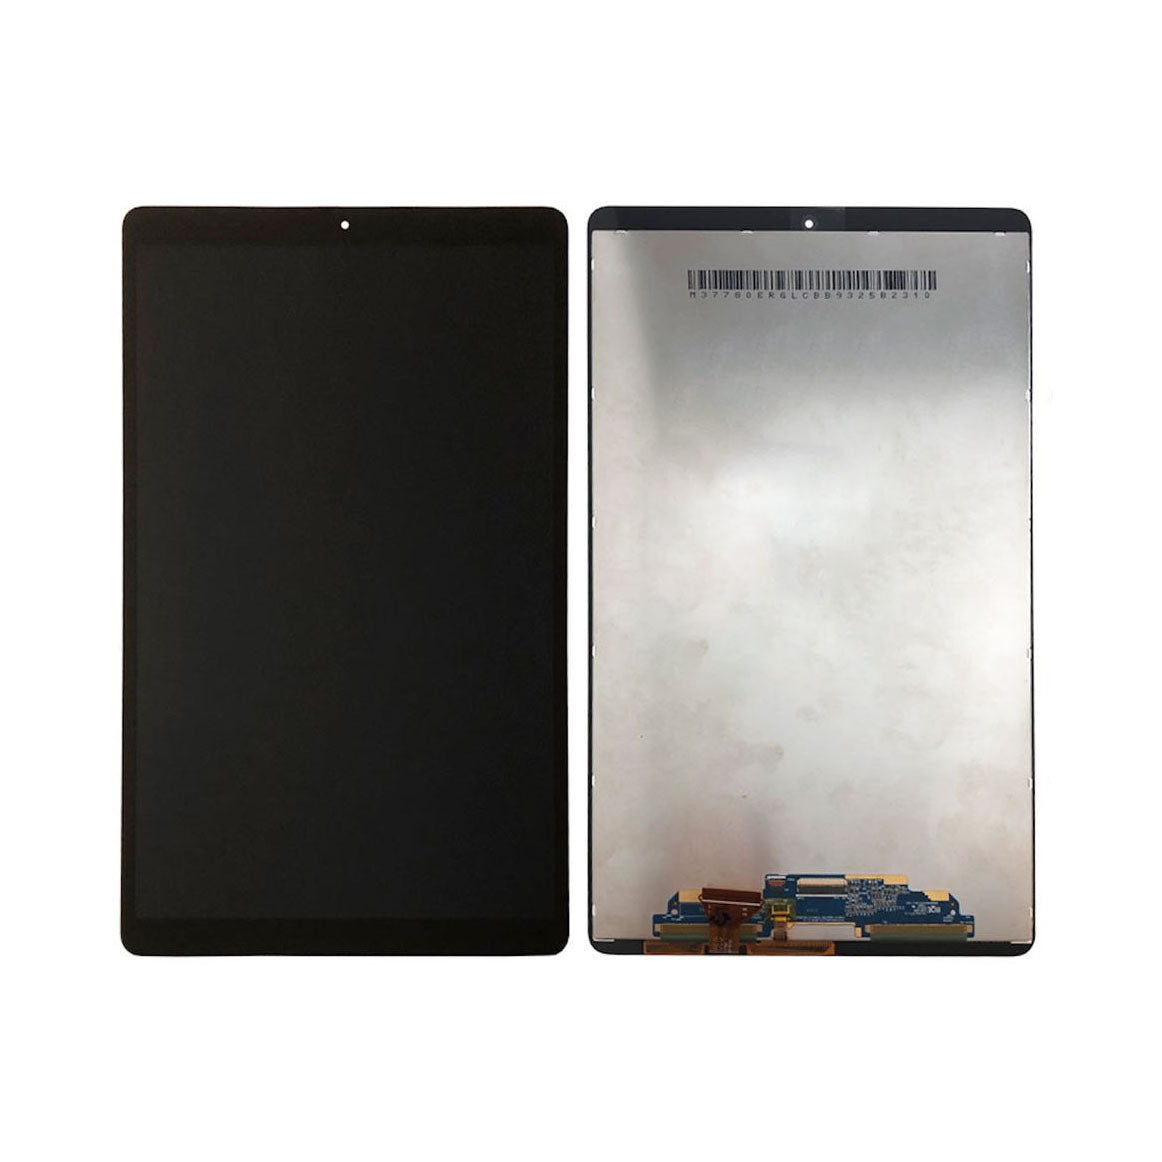 Replacement LCD Screen For Samsung Galaxy Tab A 10.1 2019 Display Assembly - Black